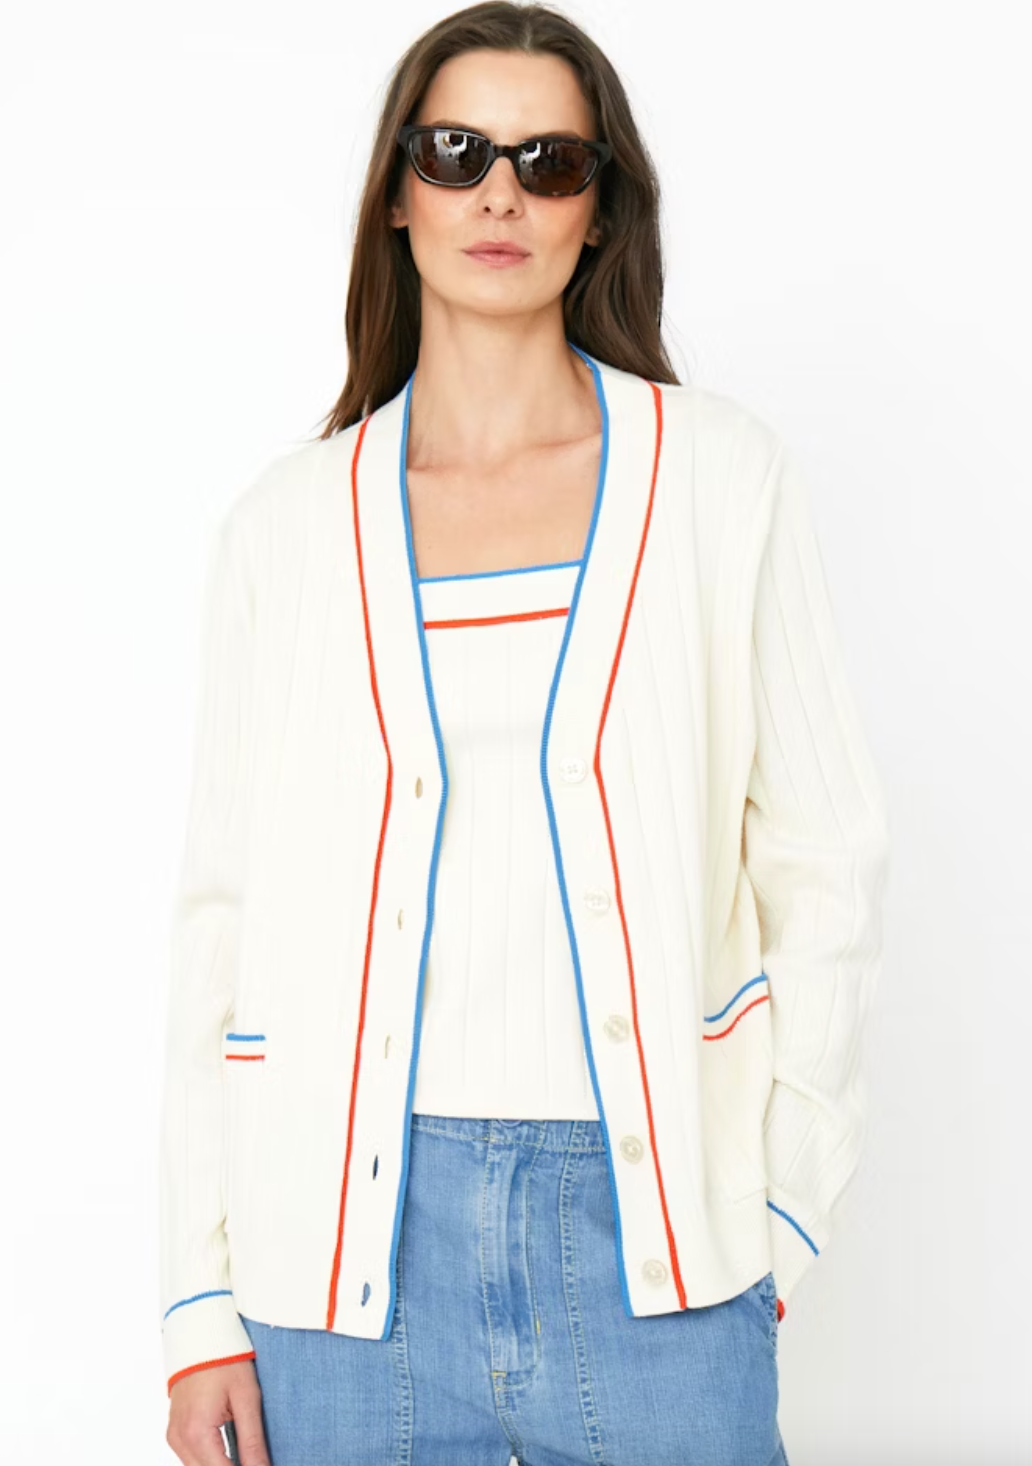 A woman wearing sunglasses models a white button-up cardigan with blue and red trim, styled over a matching striped shirt and blue jeans in Scottsdale, Arizona.